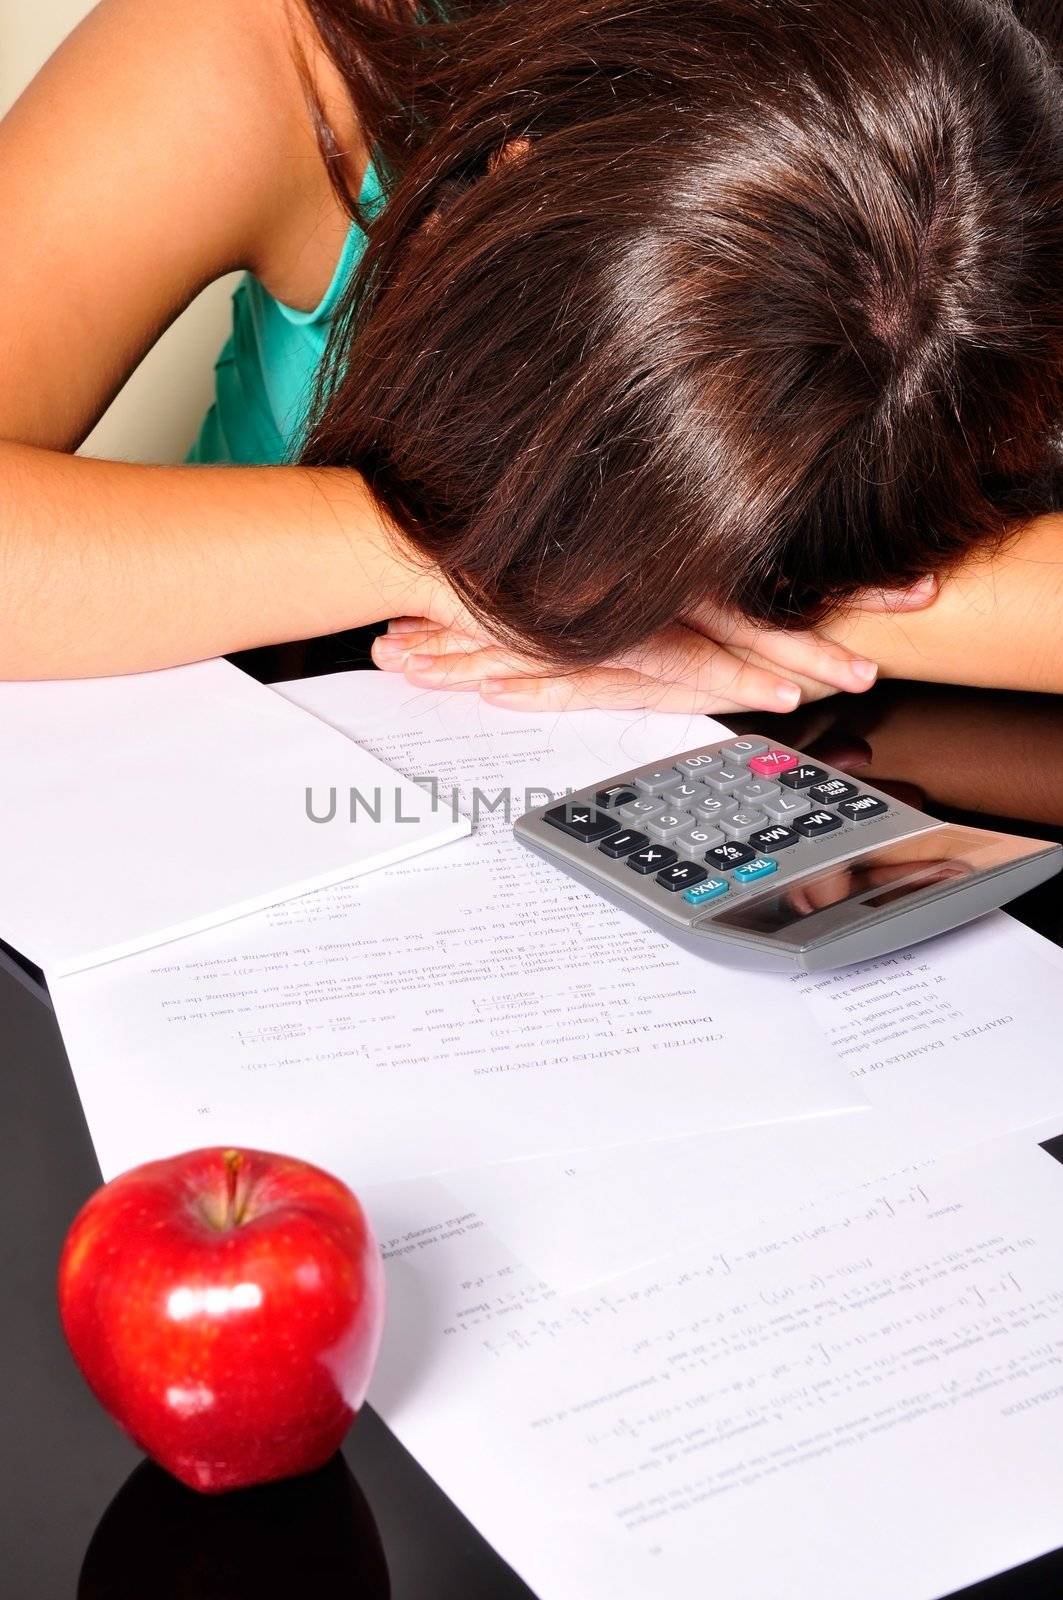 Young woman, tired of studying, sleeping over maths exercises